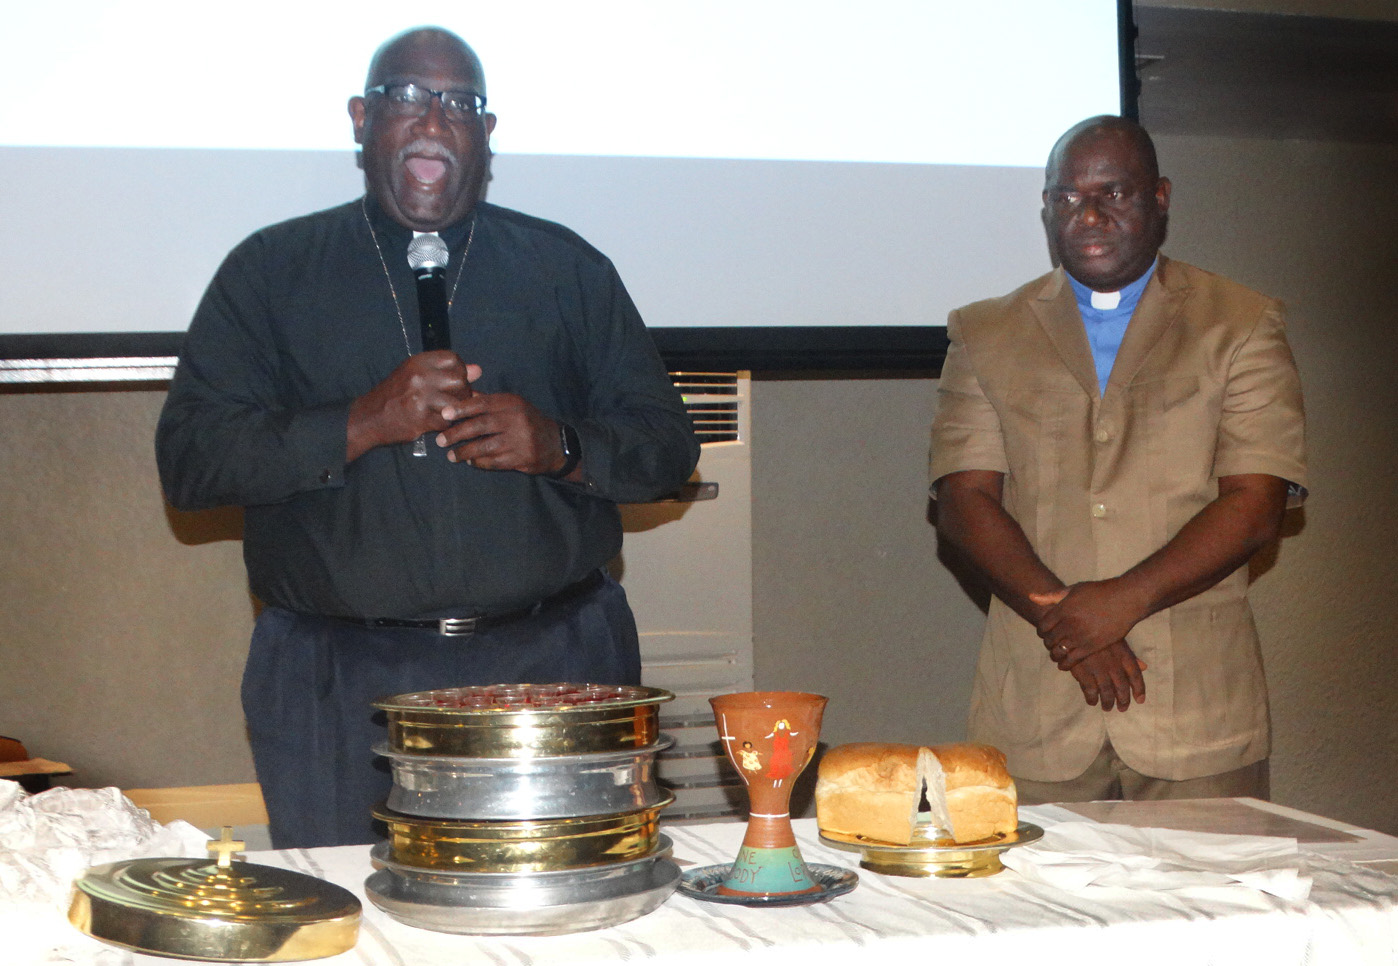 Bishop Gregory V. Palmer (left) of the Ohio West Area and the Rev. James Boye-Caulker of Sierra Leone bless the elements of Holy Communion during closing worship for the Africa Comprehensive Plan meeting in Freetown, Sierra Leone. Photo by Phileas Jusu, UMNS.